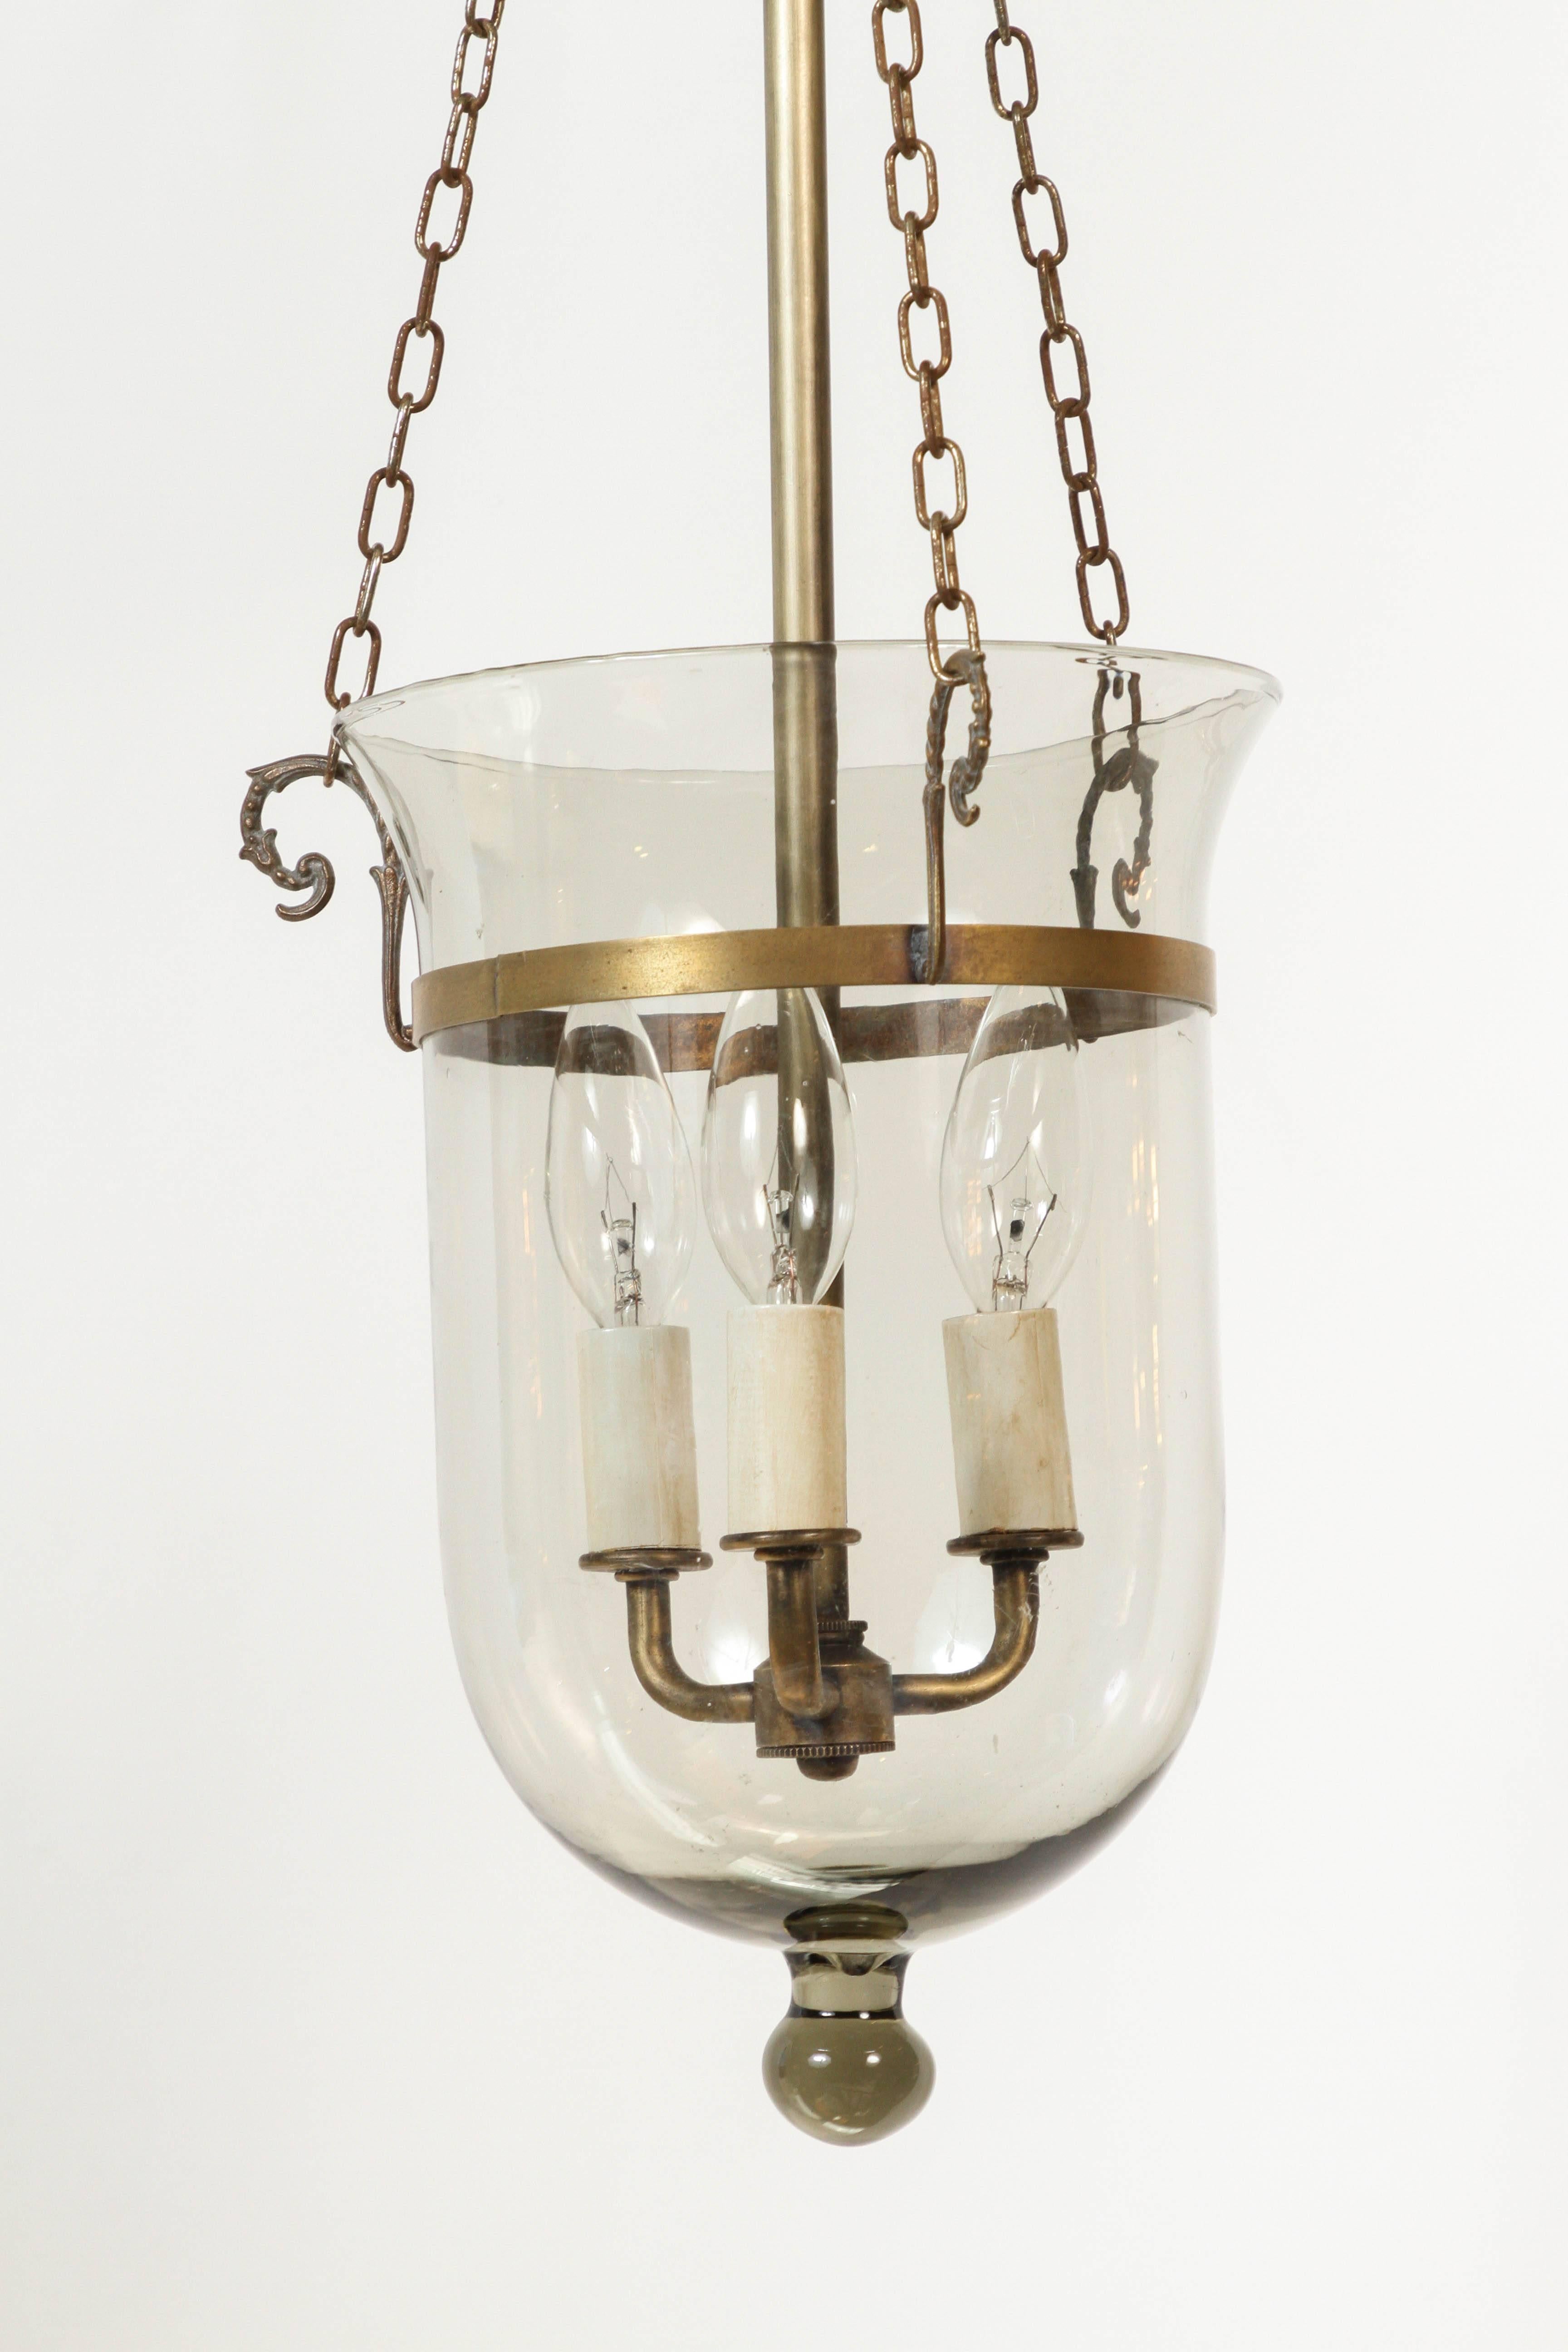 Vintage smoke glass bell jar hanging light with decorative chain - newly rewired.